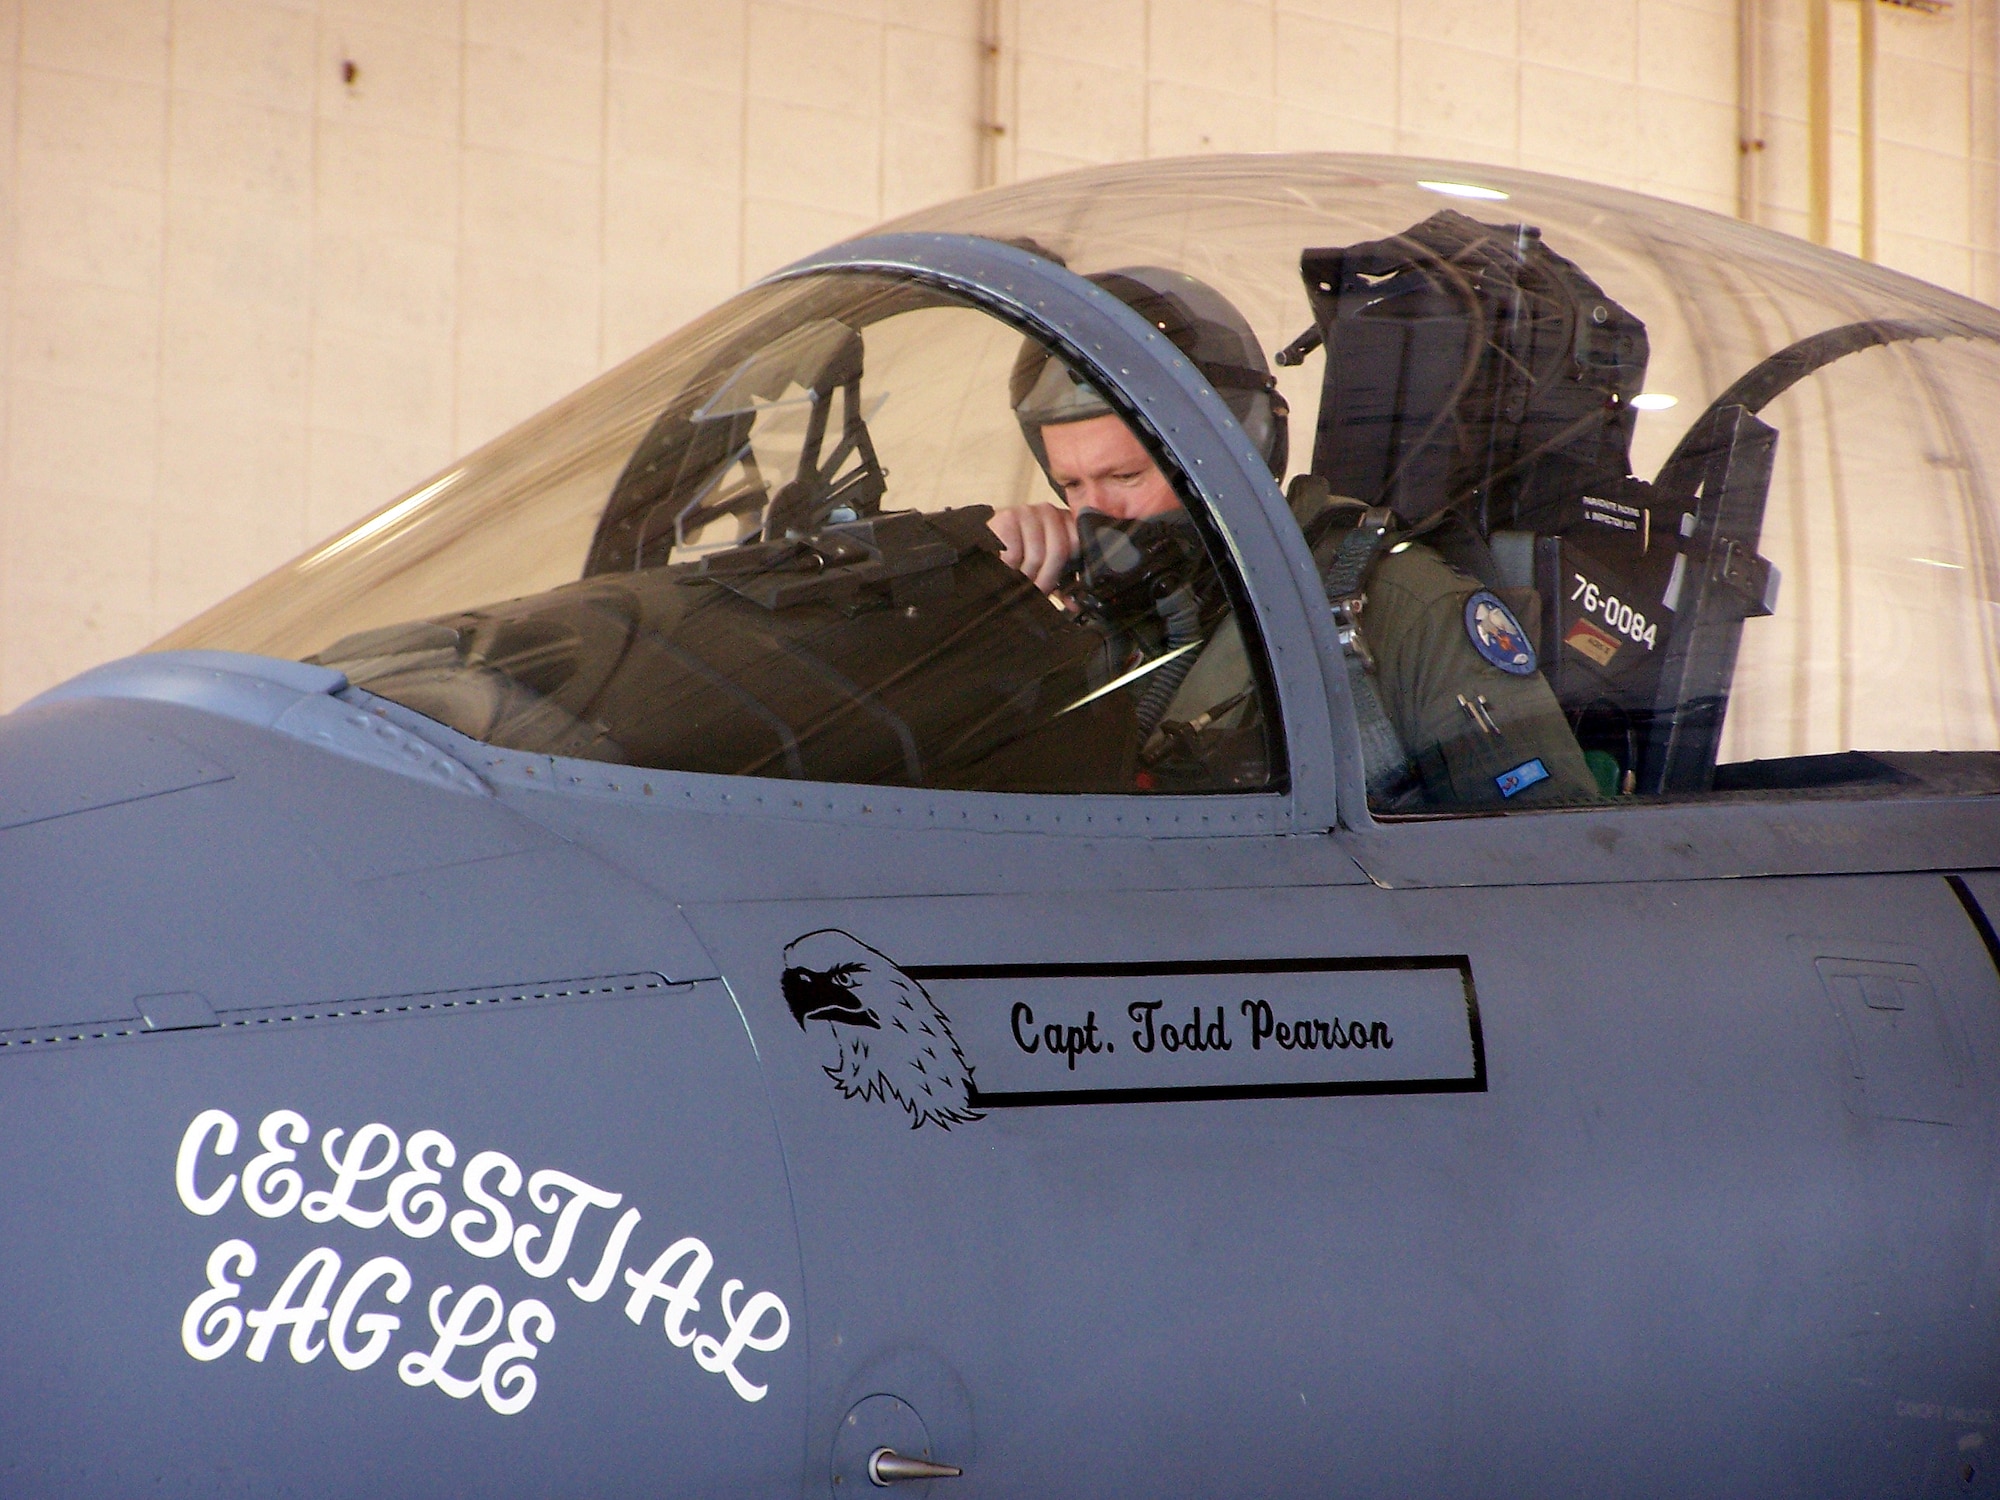 Capt. Todd Pearson, 390th Fighter Squadron pilot from Mountain Home Air Force Base, Idaho, performs pre-flight checks on an F-15A at the Florida Air National Guard 125th Fighter Wing located at Homestead Air Reserve Base, Fla., during the Celestial Eagle Remembrance Flight on Sept. 13. Captain Pearson’s father, retired Maj. Gen. Doug Pearson, flew the exact same F-15, now assigned to the 125th FW, exactly 22 years prior while accomplishing the only successful satellite kill by an aircraft launched missile in history. (U.S. Air Force photo/Senior Airman Erik Hofmeyer)